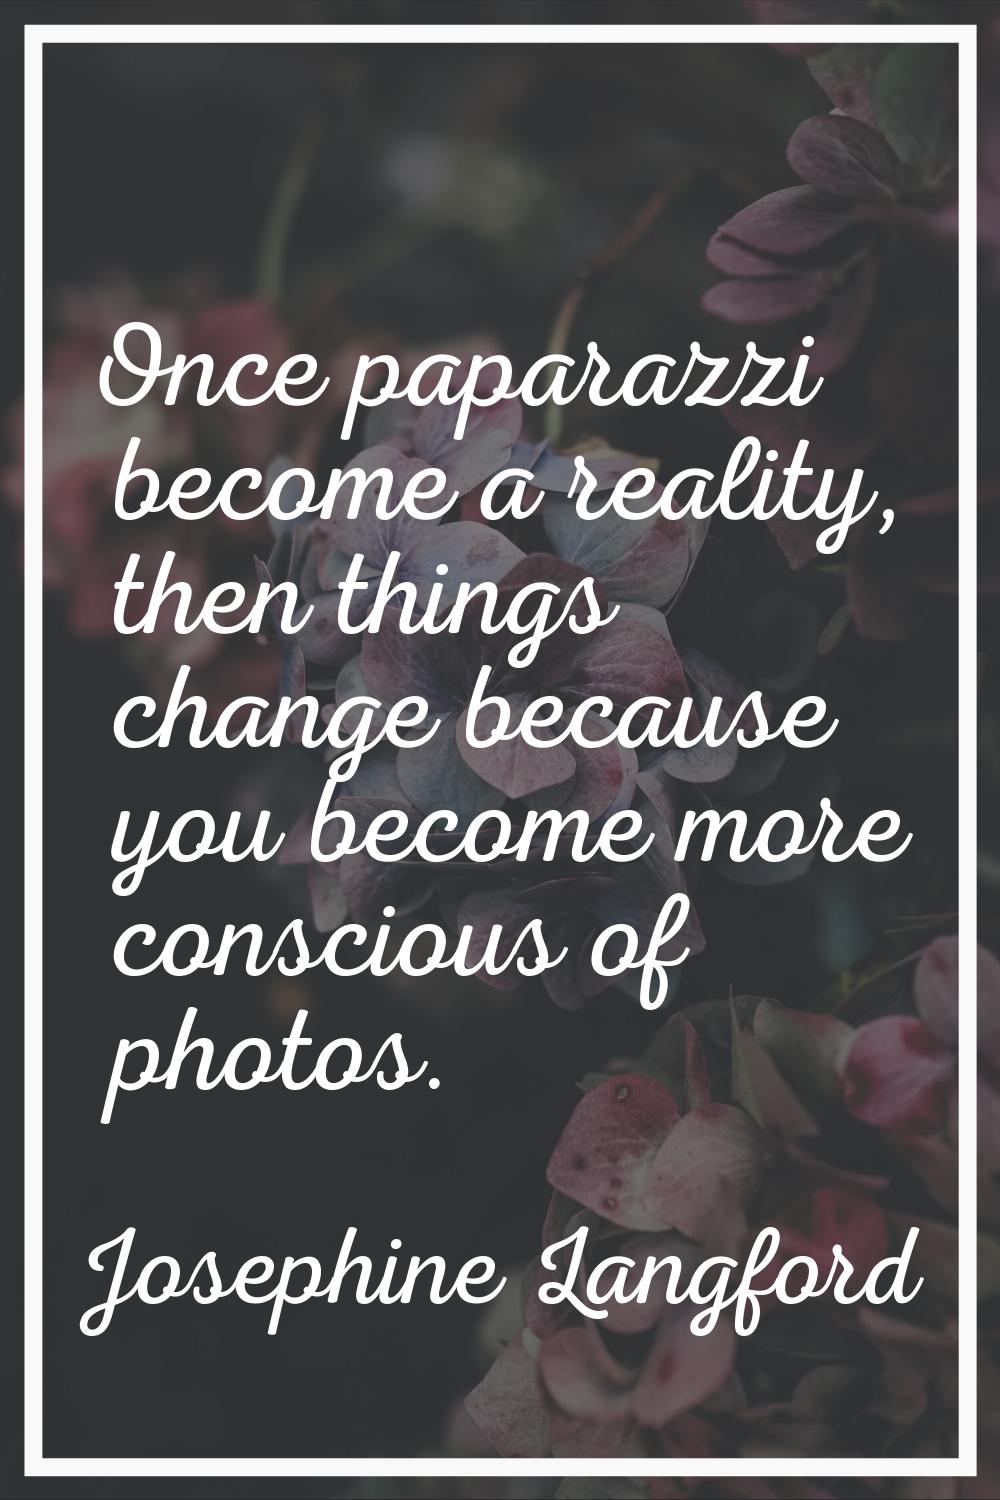 Once paparazzi become a reality, then things change because you become more conscious of photos.